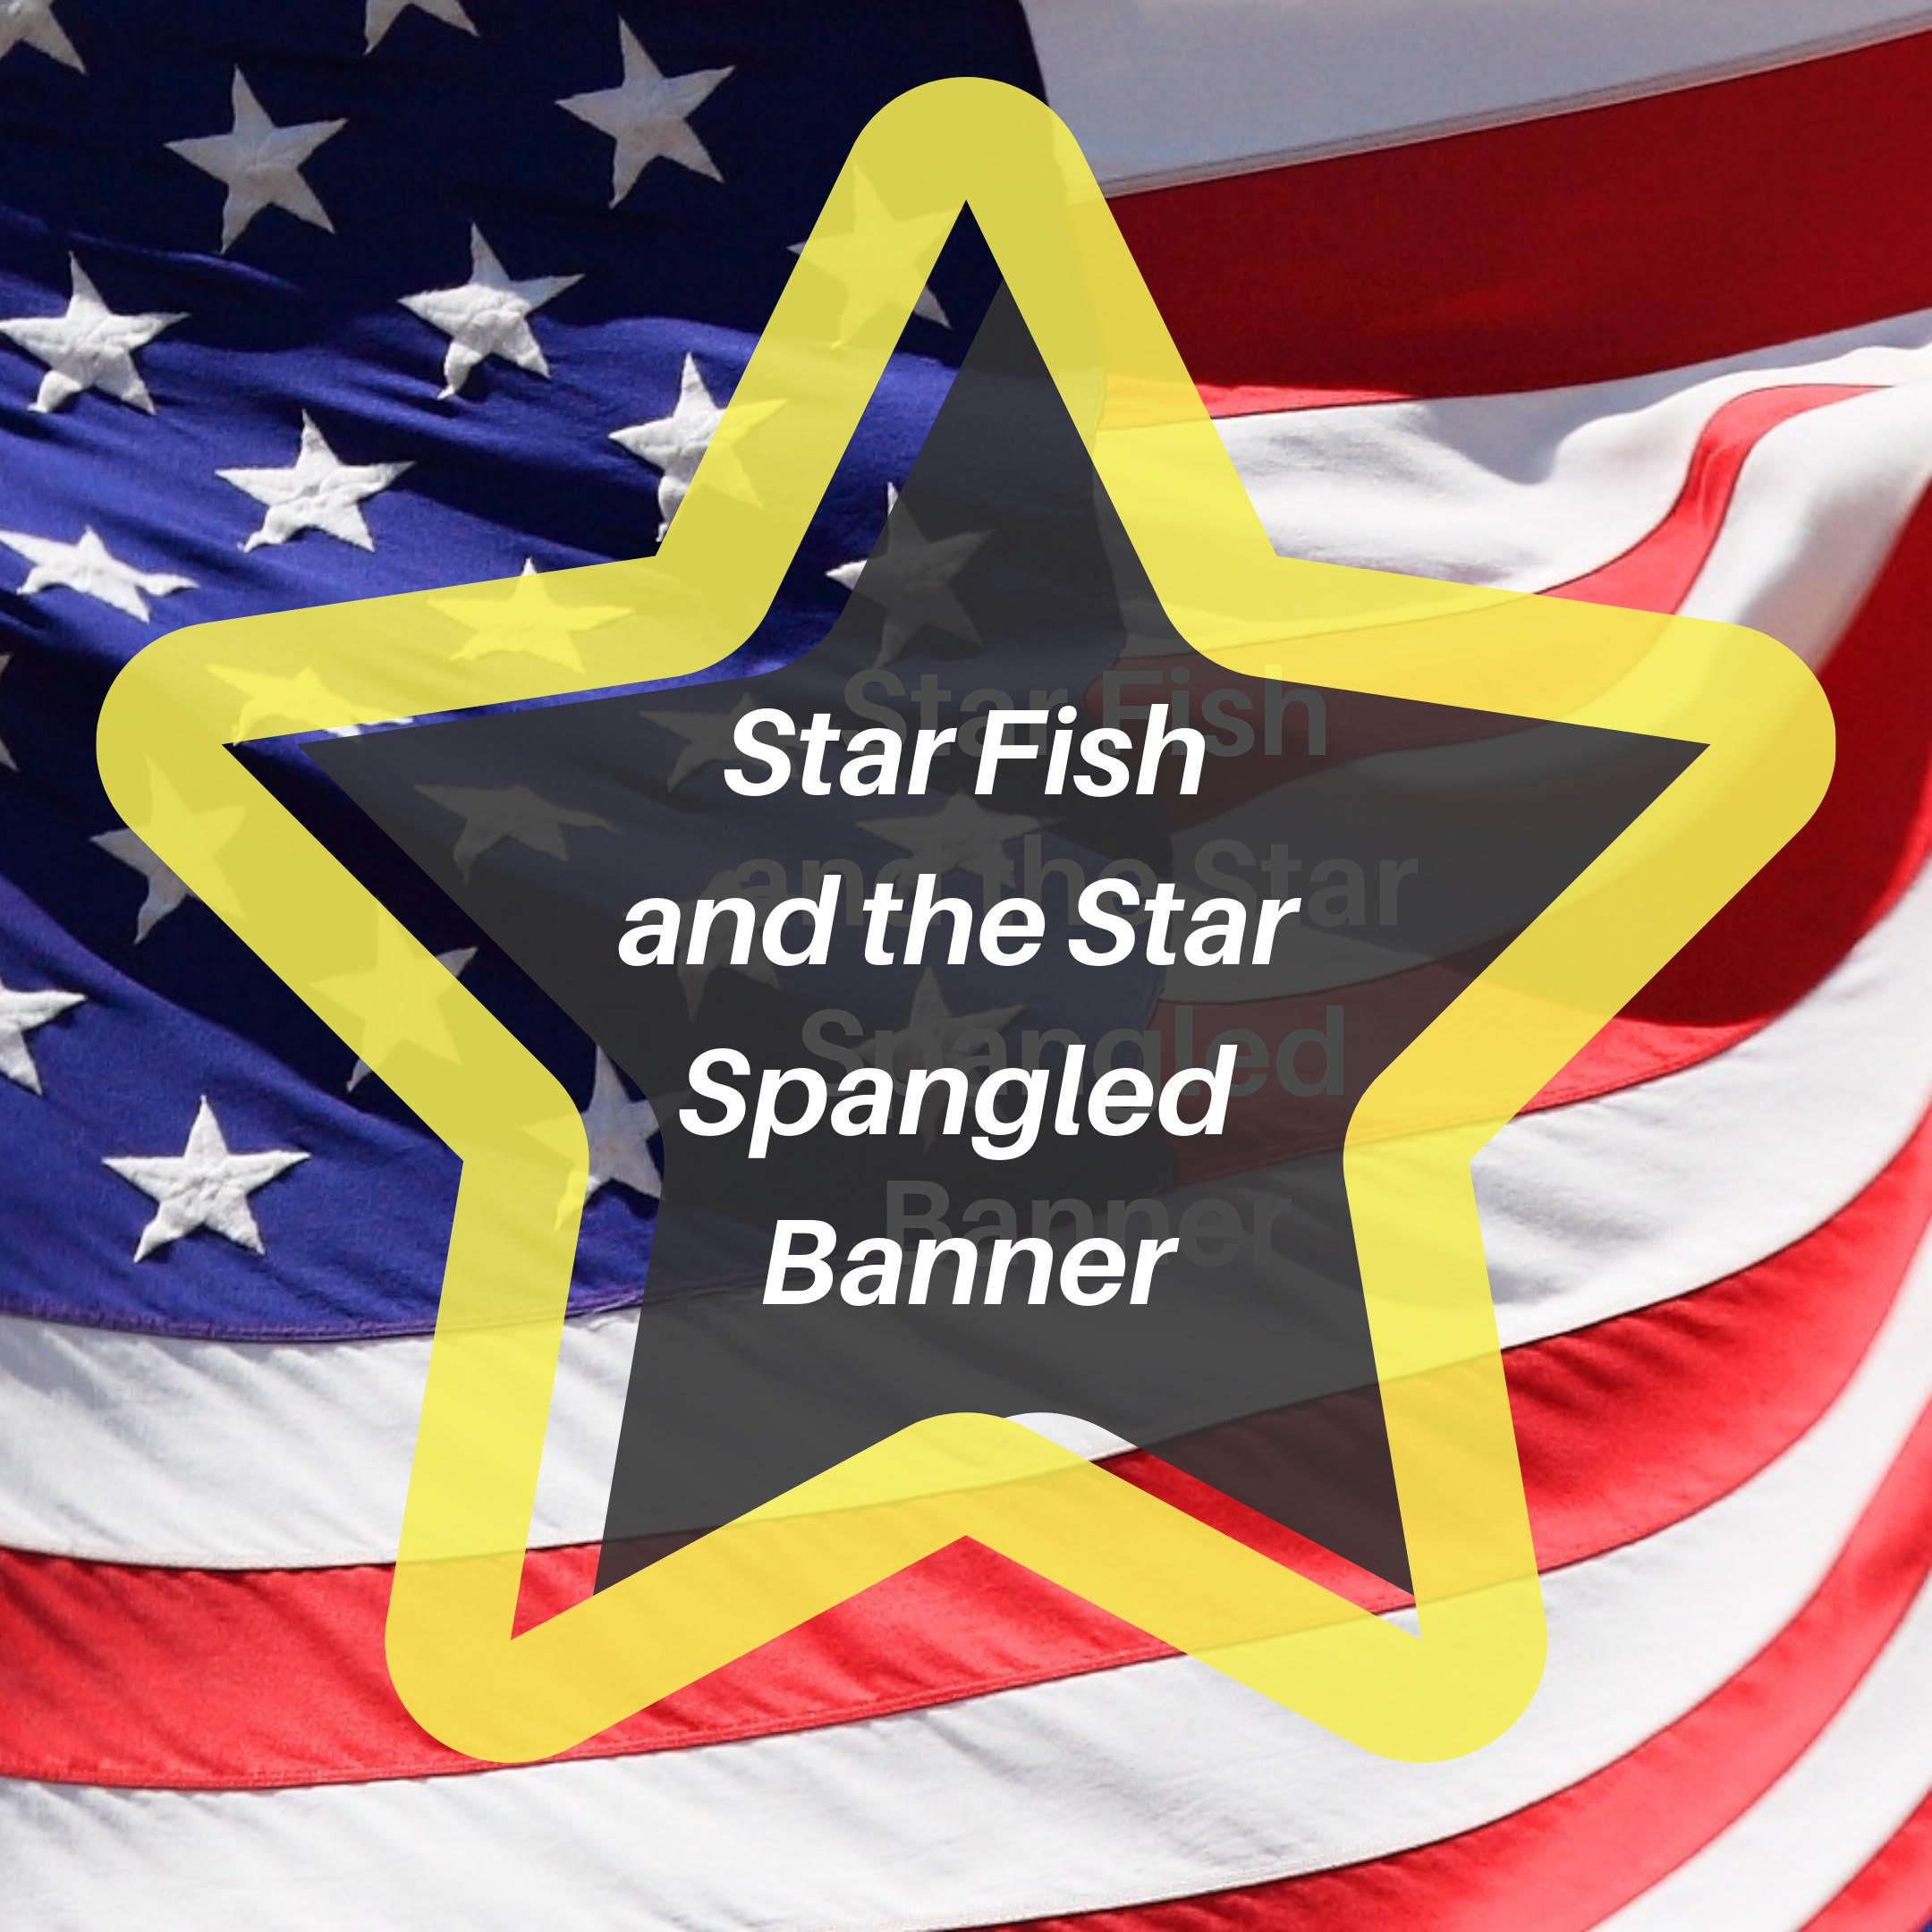 Star Fish and the Star Spangled Banner